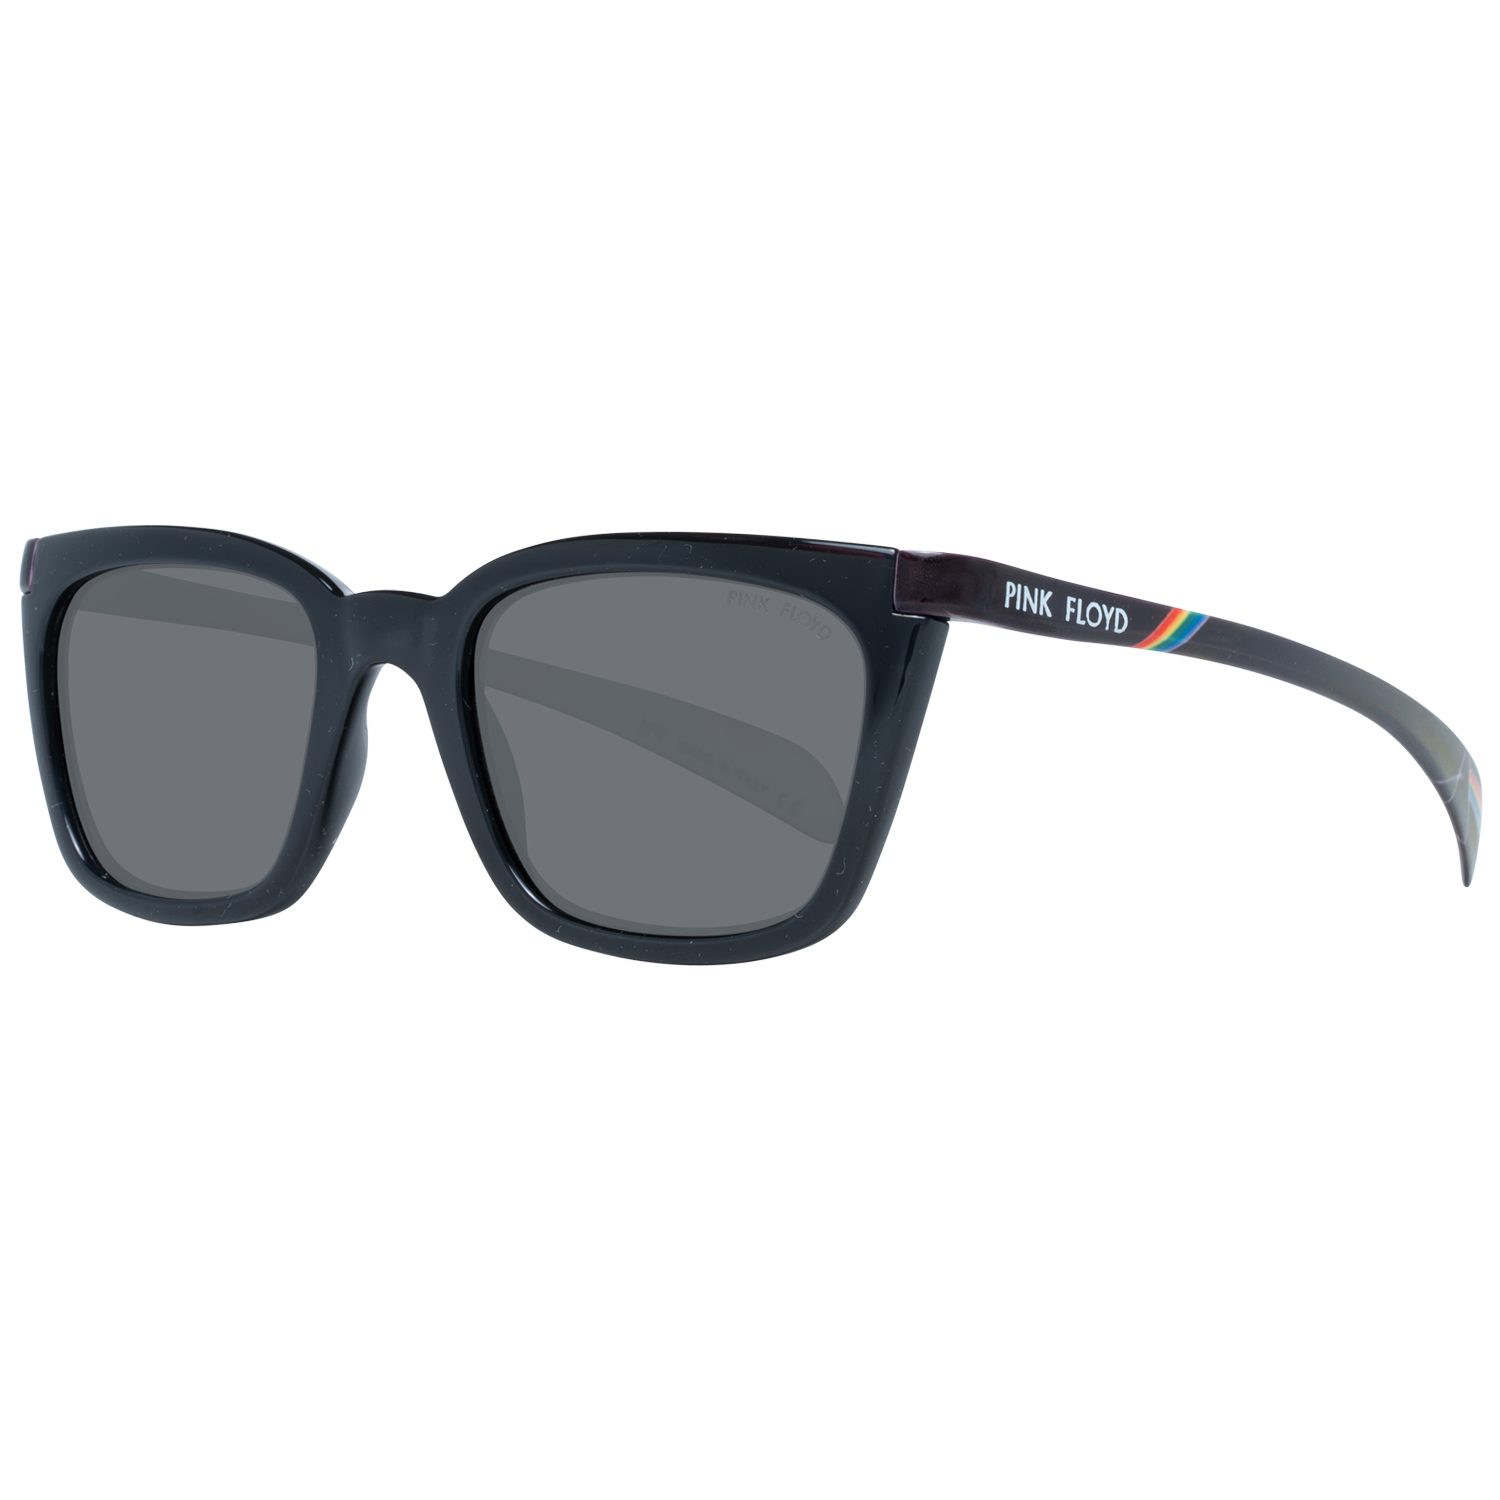 Try Cover Change Sonnenbrille TS504 5001